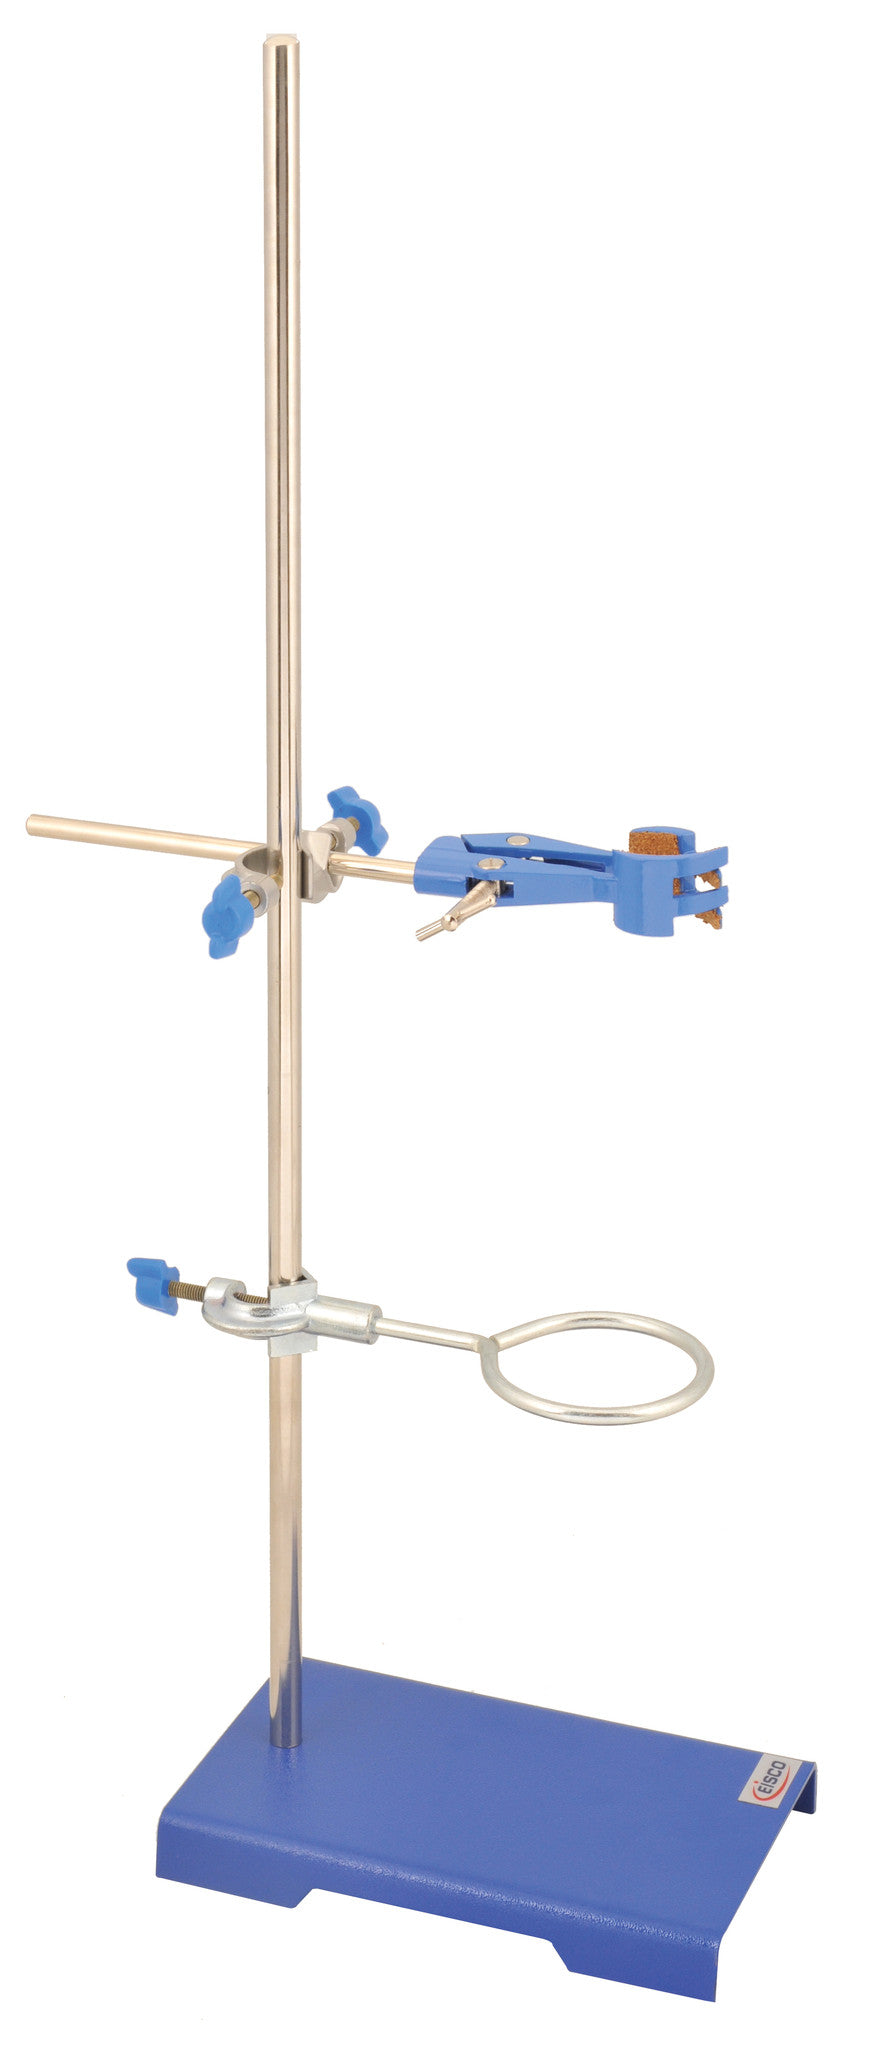 MTST1 Premium Lab Metalware Set - Support Stand, Rod, Clamp and Retort Ring